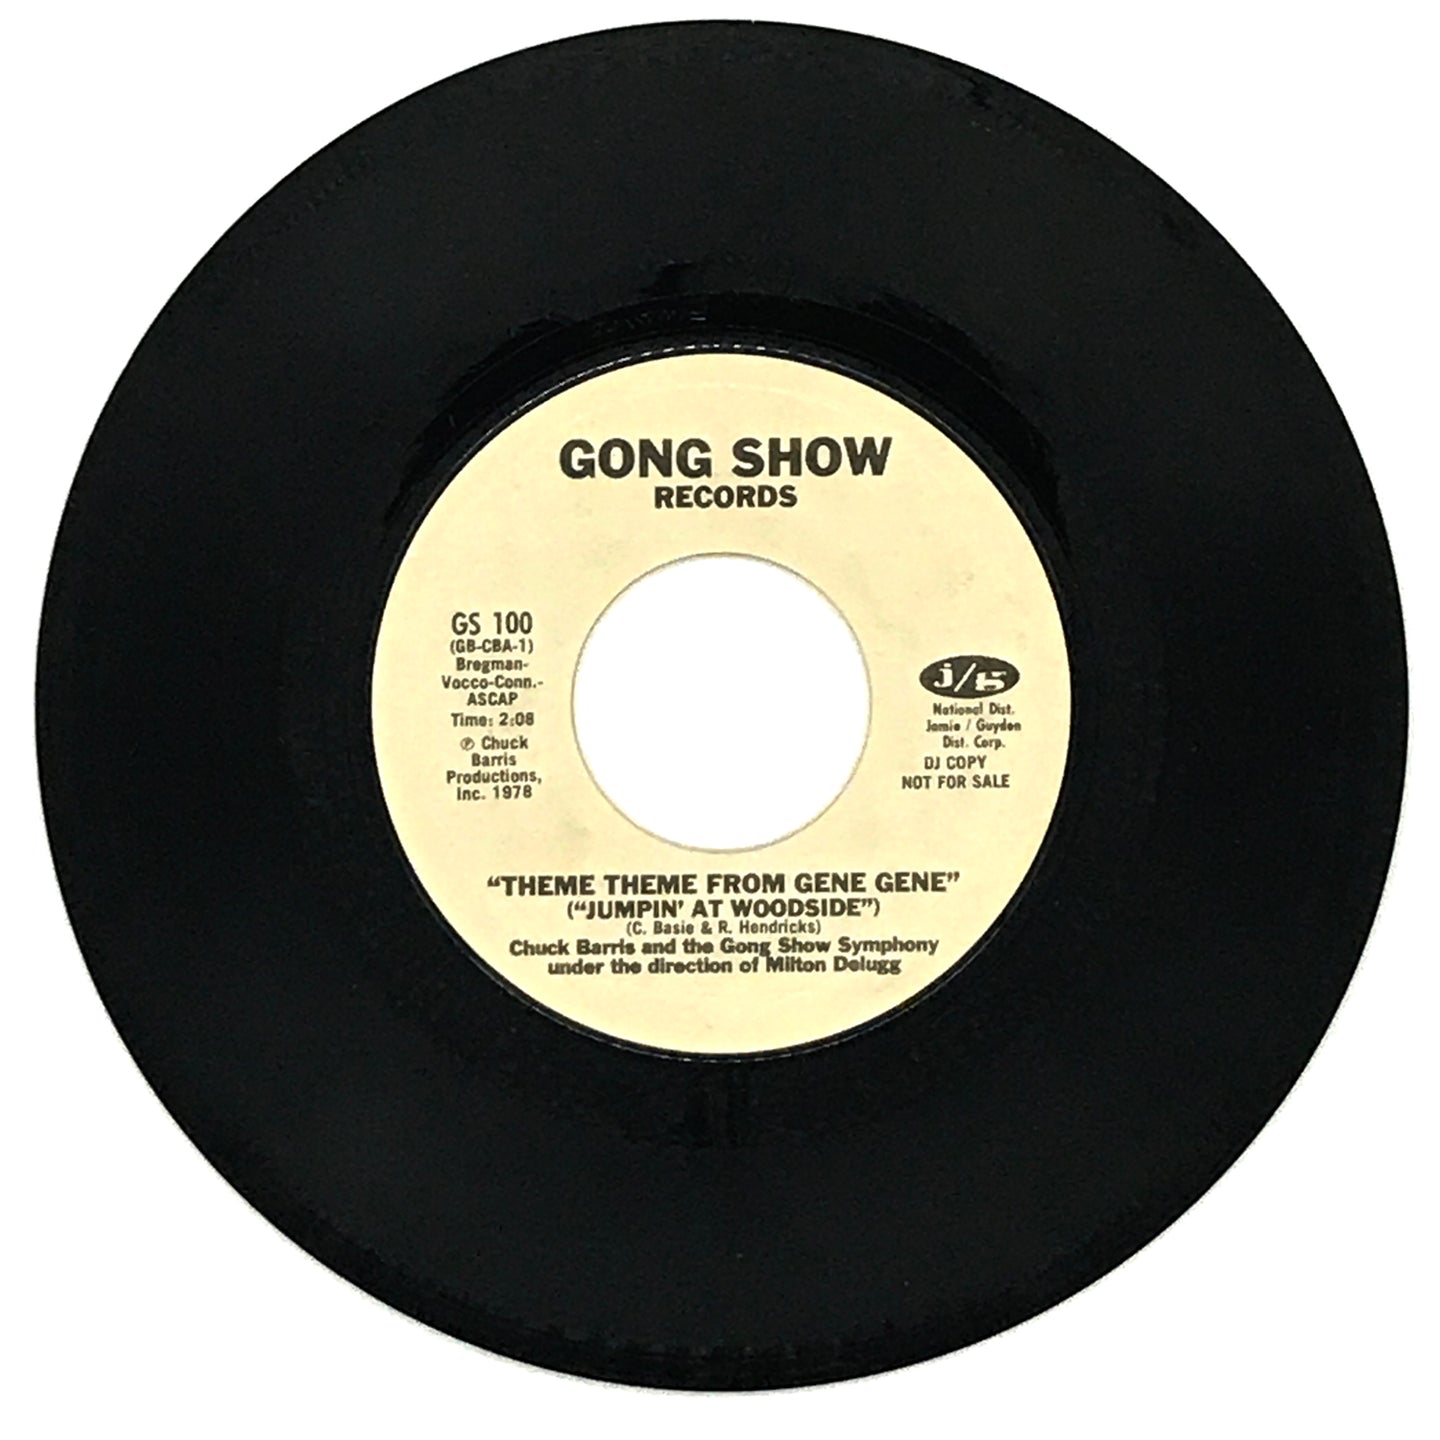 Chuck Barris + The Gong Show Symphony : THEME THEME FROM GENE GENE/ LOVEE'S COME BACK